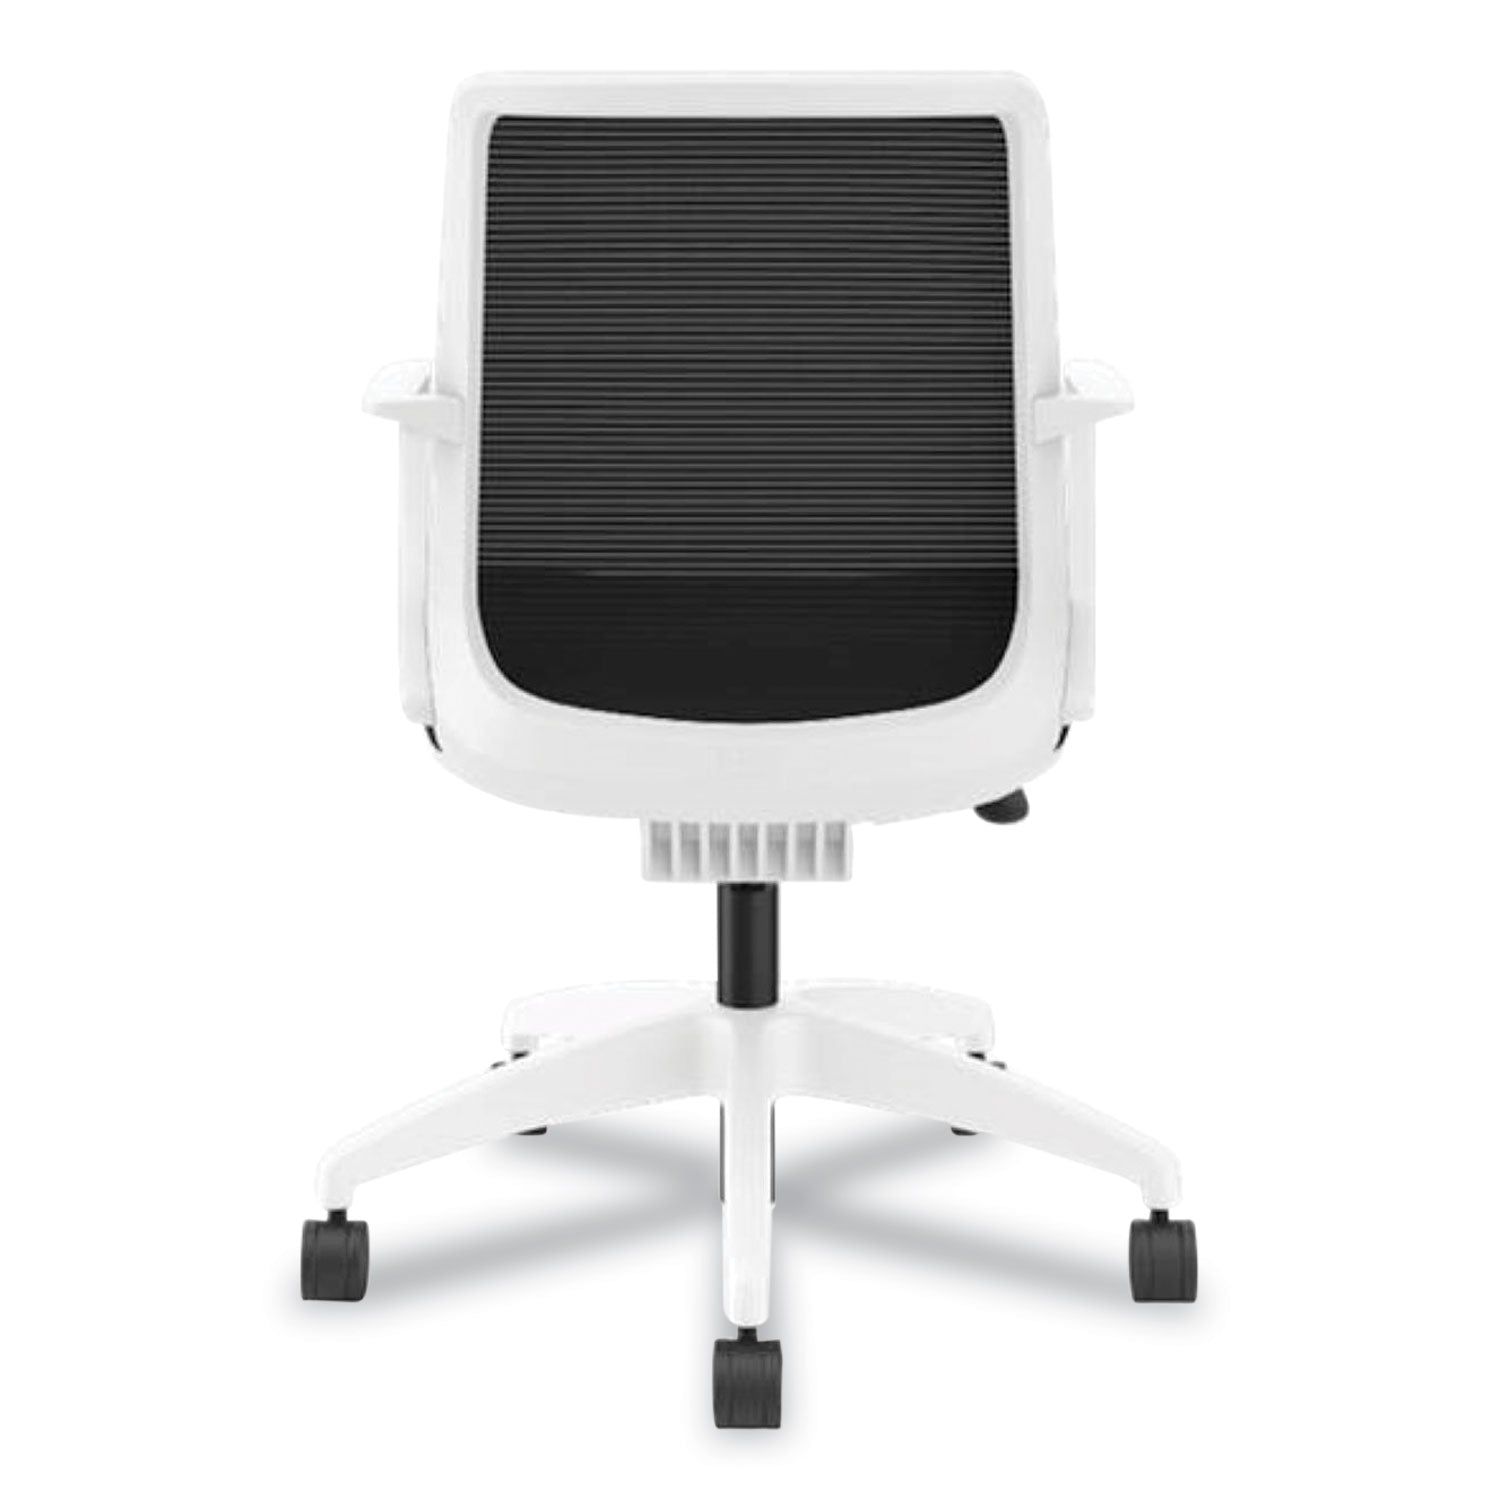 cliq-office-chair-supports-up-to-300-lb-17-to-22-seat-height-black-seat-back-white-base-ships-in-7-10-business-days_honclqimcu10dw - 4